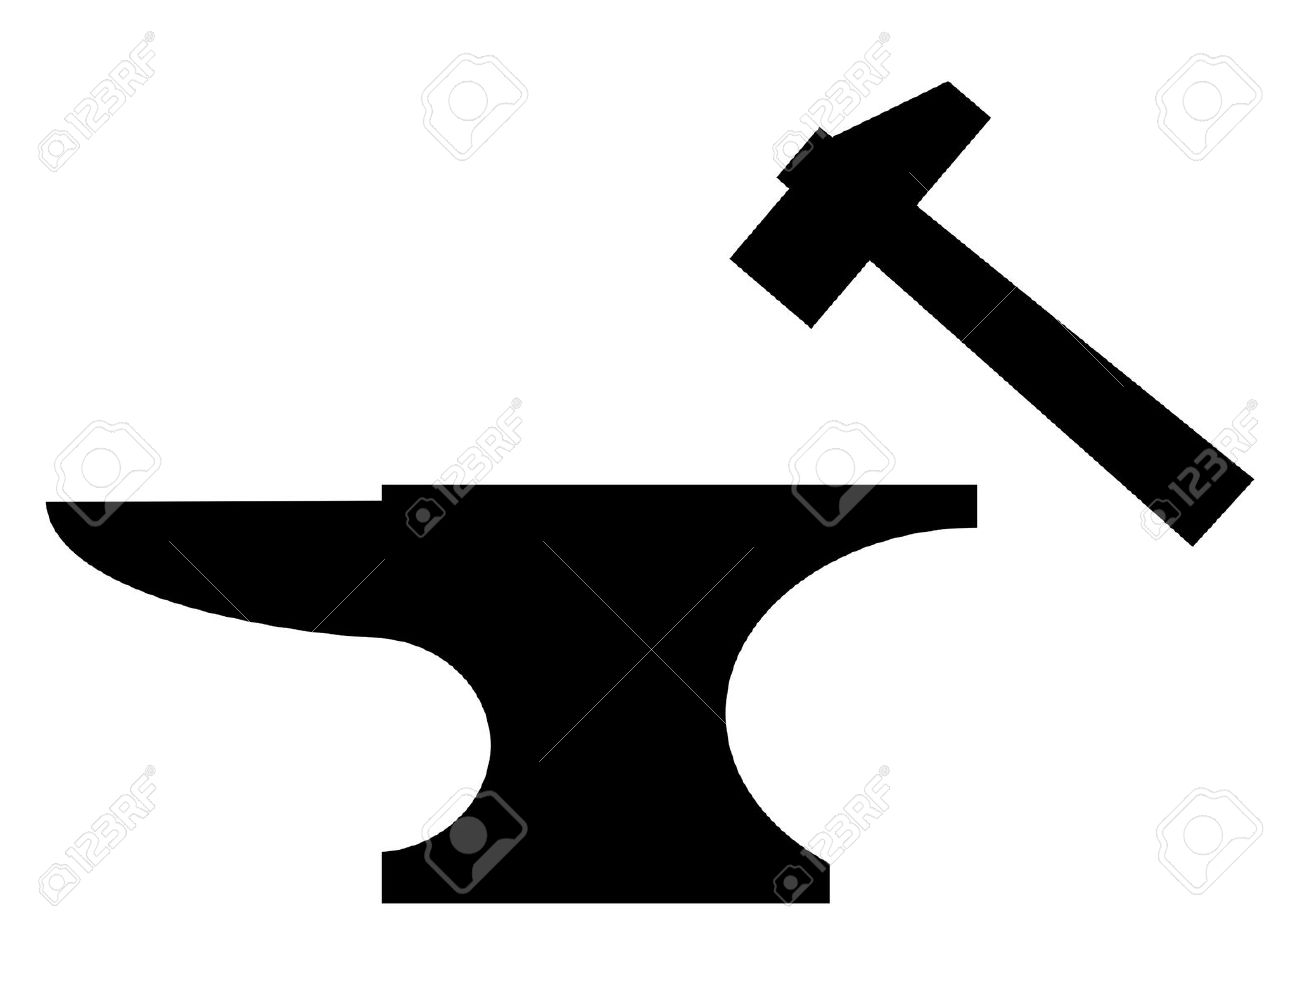 Silhouette hammer at getdrawings. Anvil clipart svg